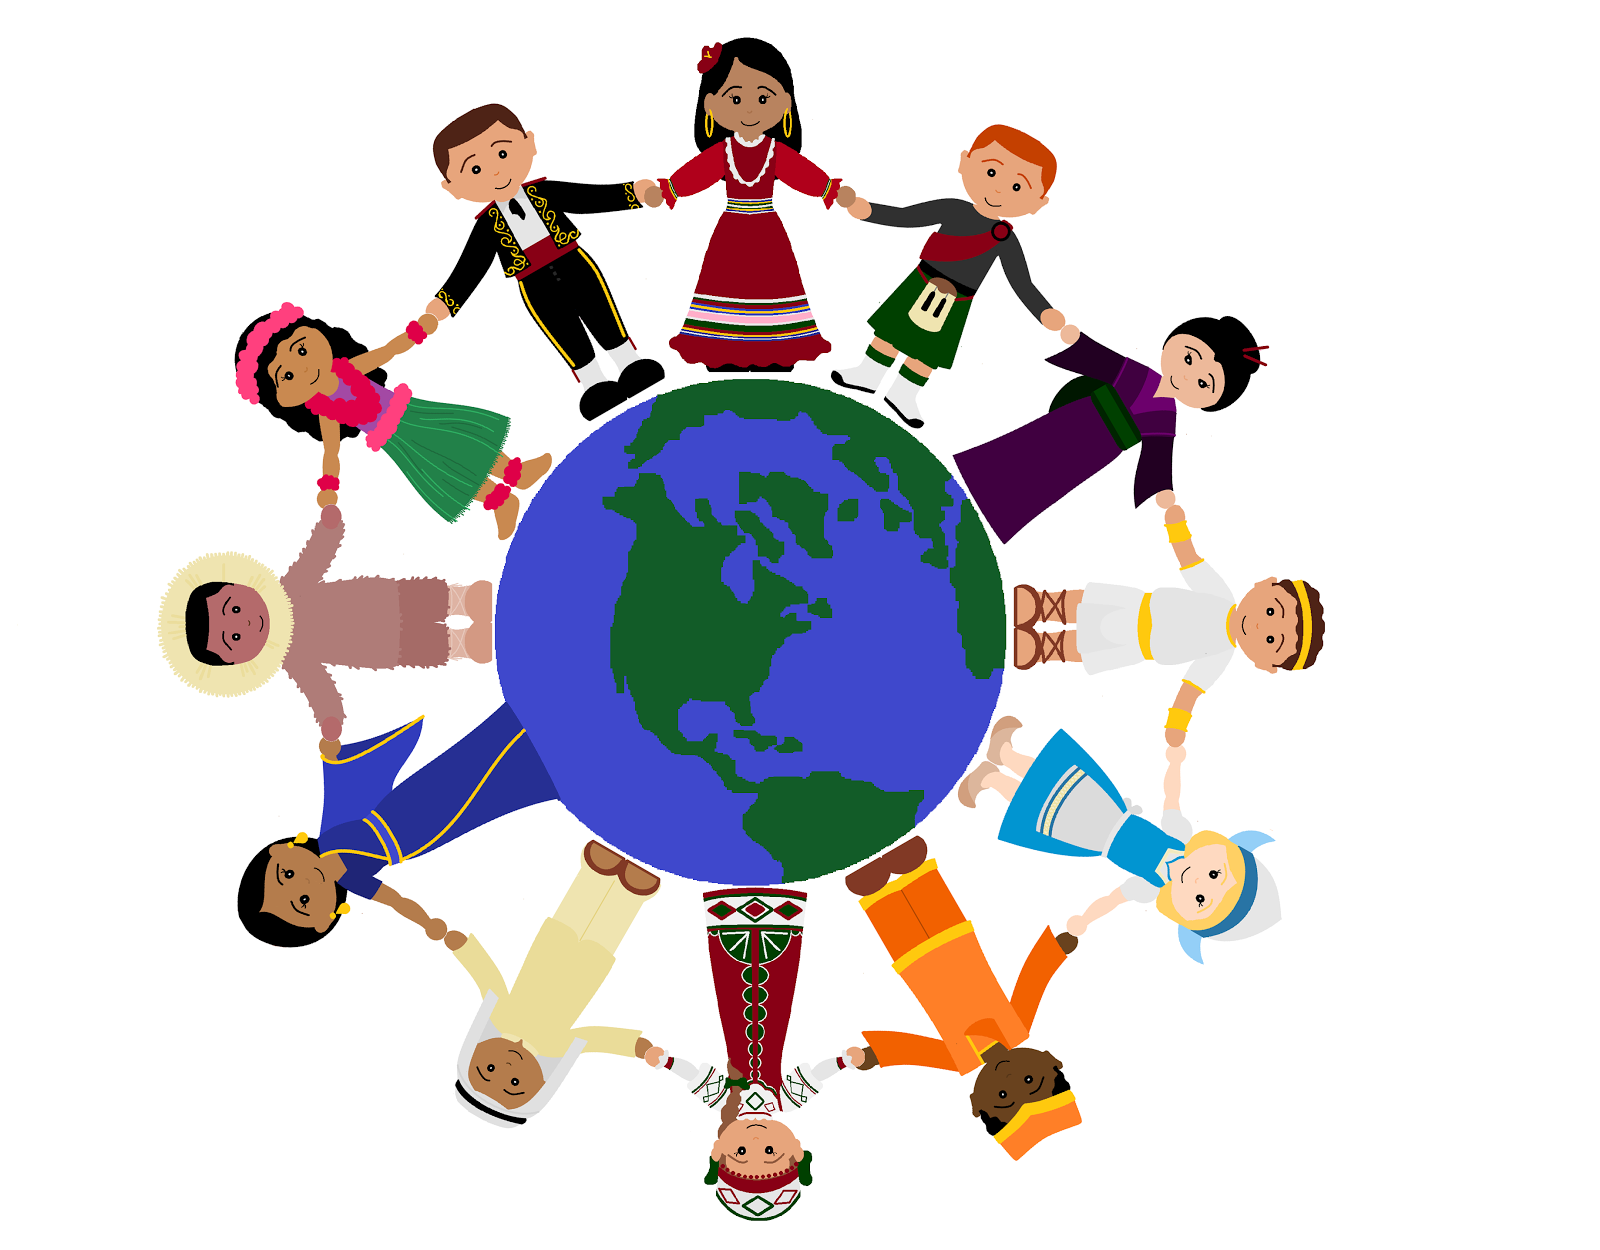 World With People Holding Hands - ClipArt Best